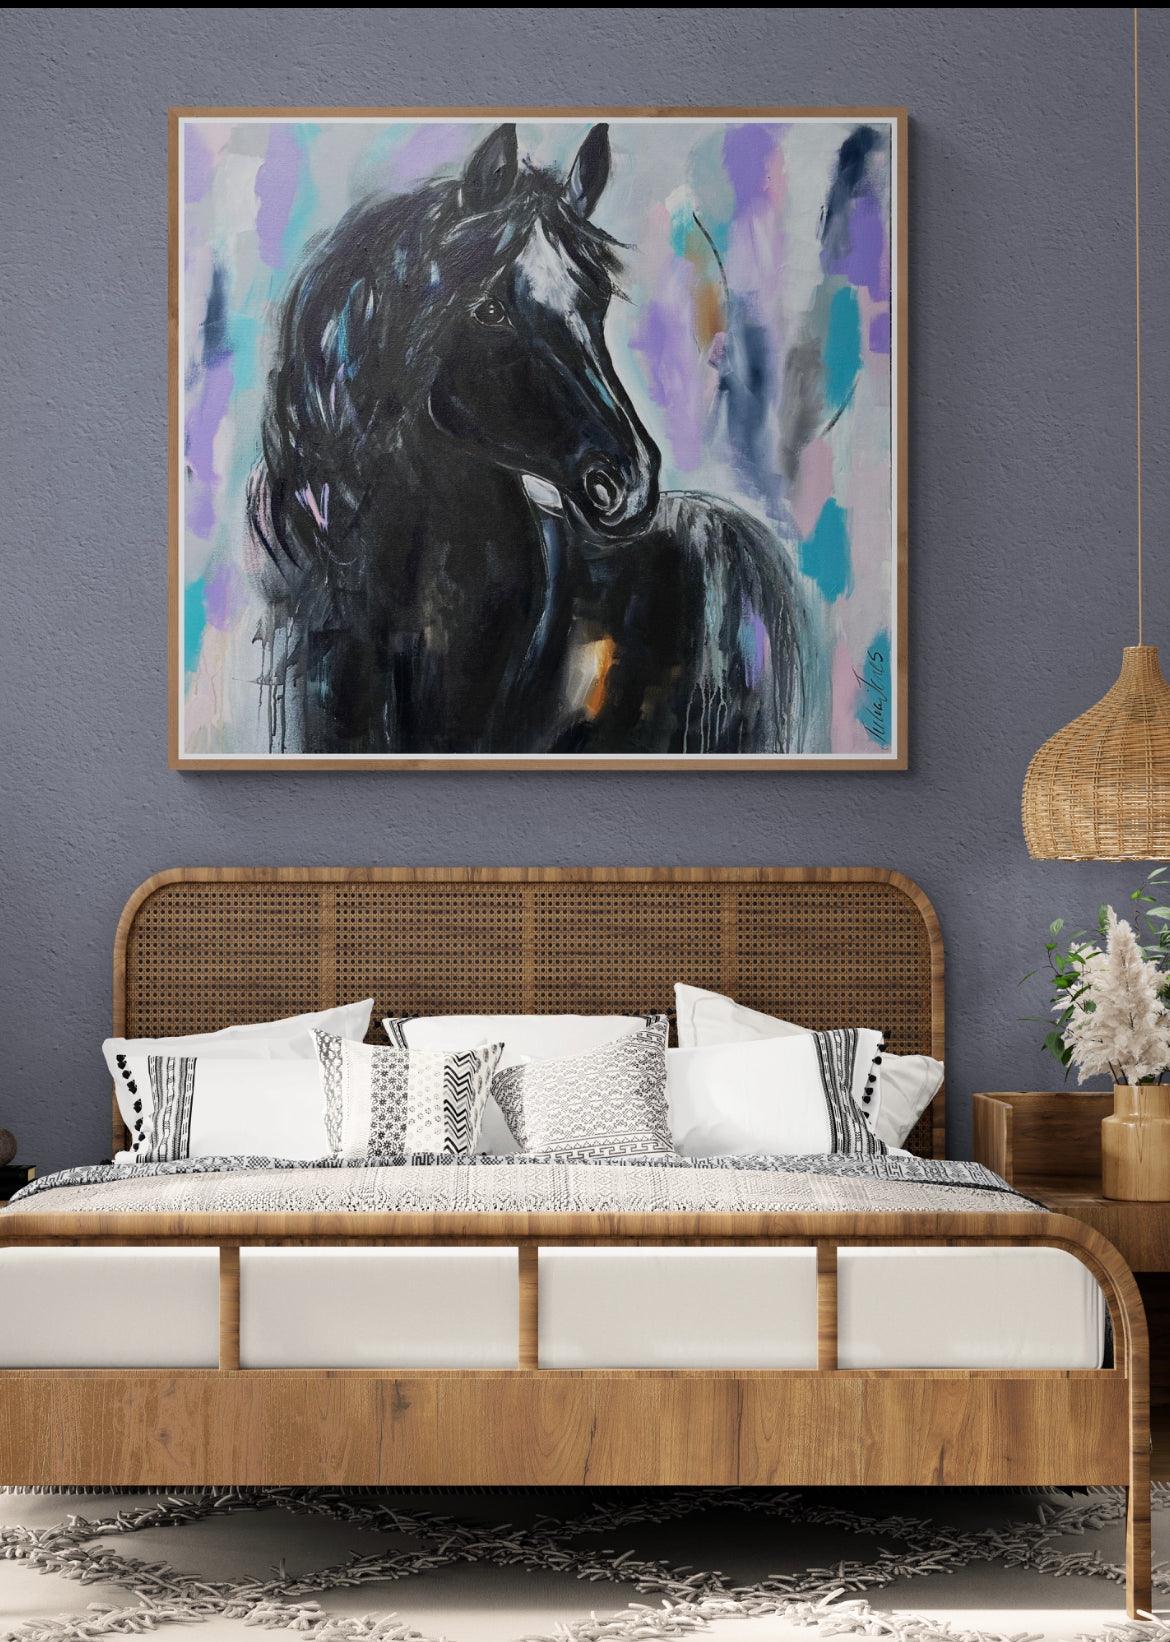 Black Stallion untamed beauty - 900 x 1m - Original Artwork - Available by Commission